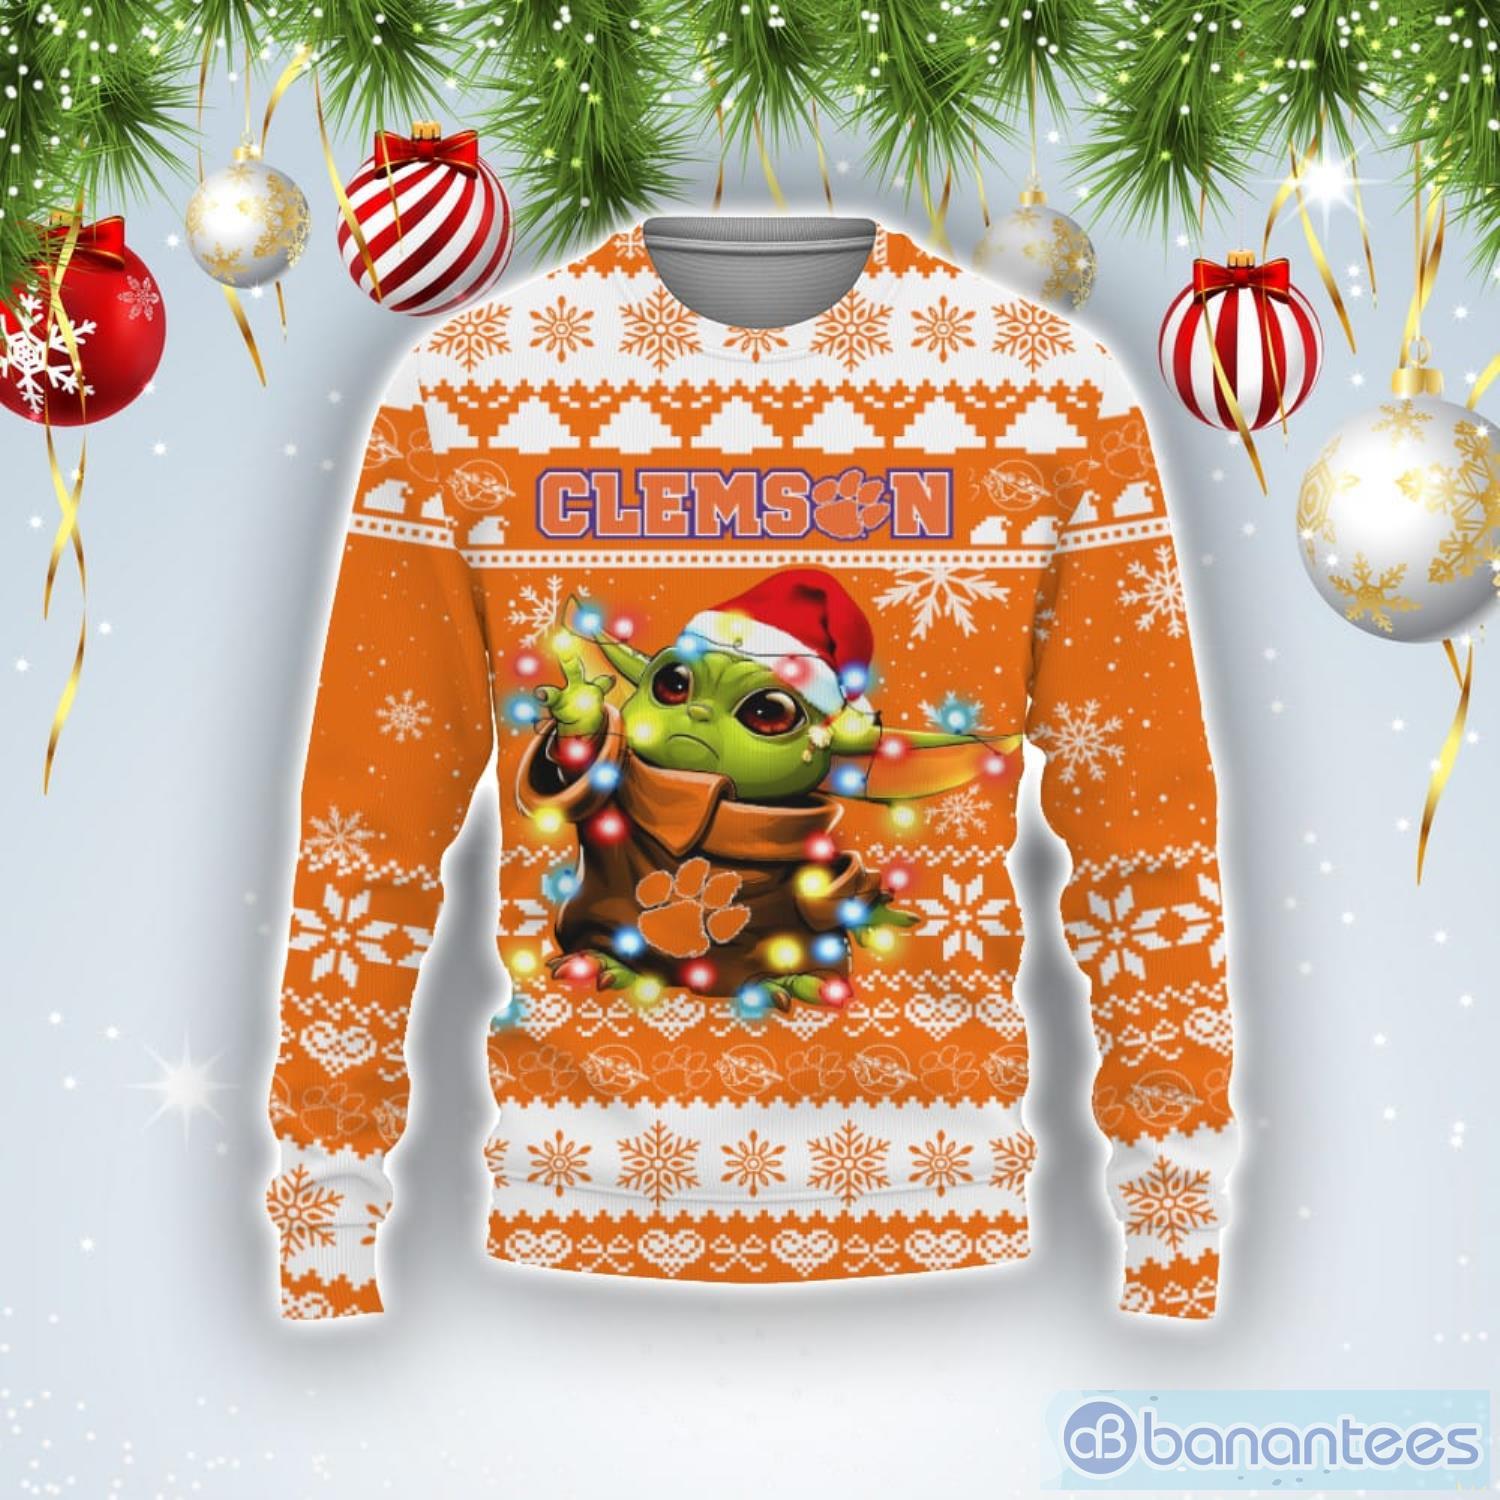 Clemson Tigers Baby Yoda Star Wars Sports Football American Ugly Christmas Sweater Product Photo 1